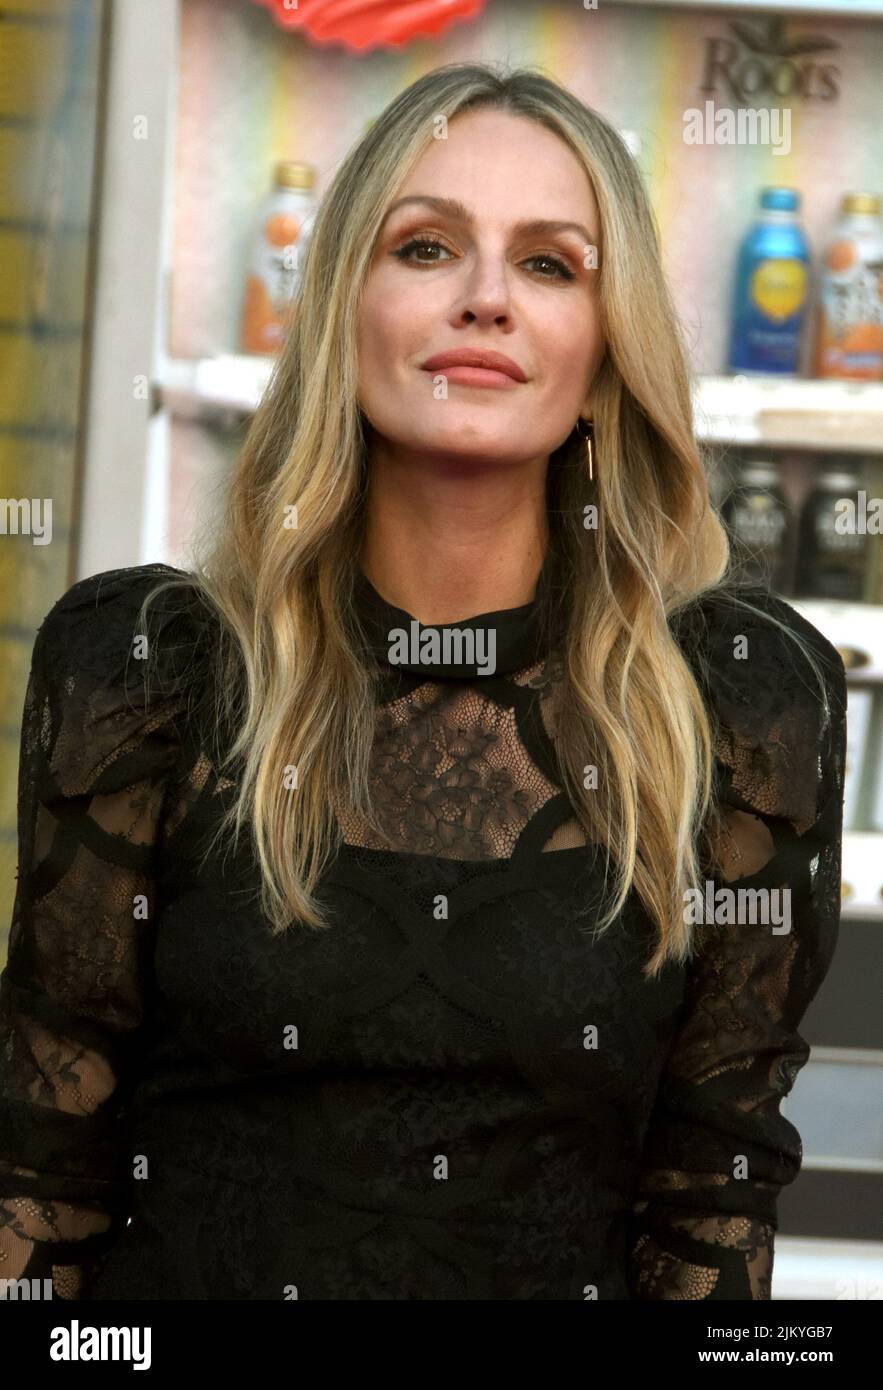 Los Angeles, California, USA 1st August 2022 Actress Monet Mazur attends the Los Angeles Premiere of Columbia Pictures' 'Bullet Train' at Regency Village Theatre on August 1, 2022 in Los Angeles, California, USA. Photo by Barry King/Alamy Stock Photo Stock Photo